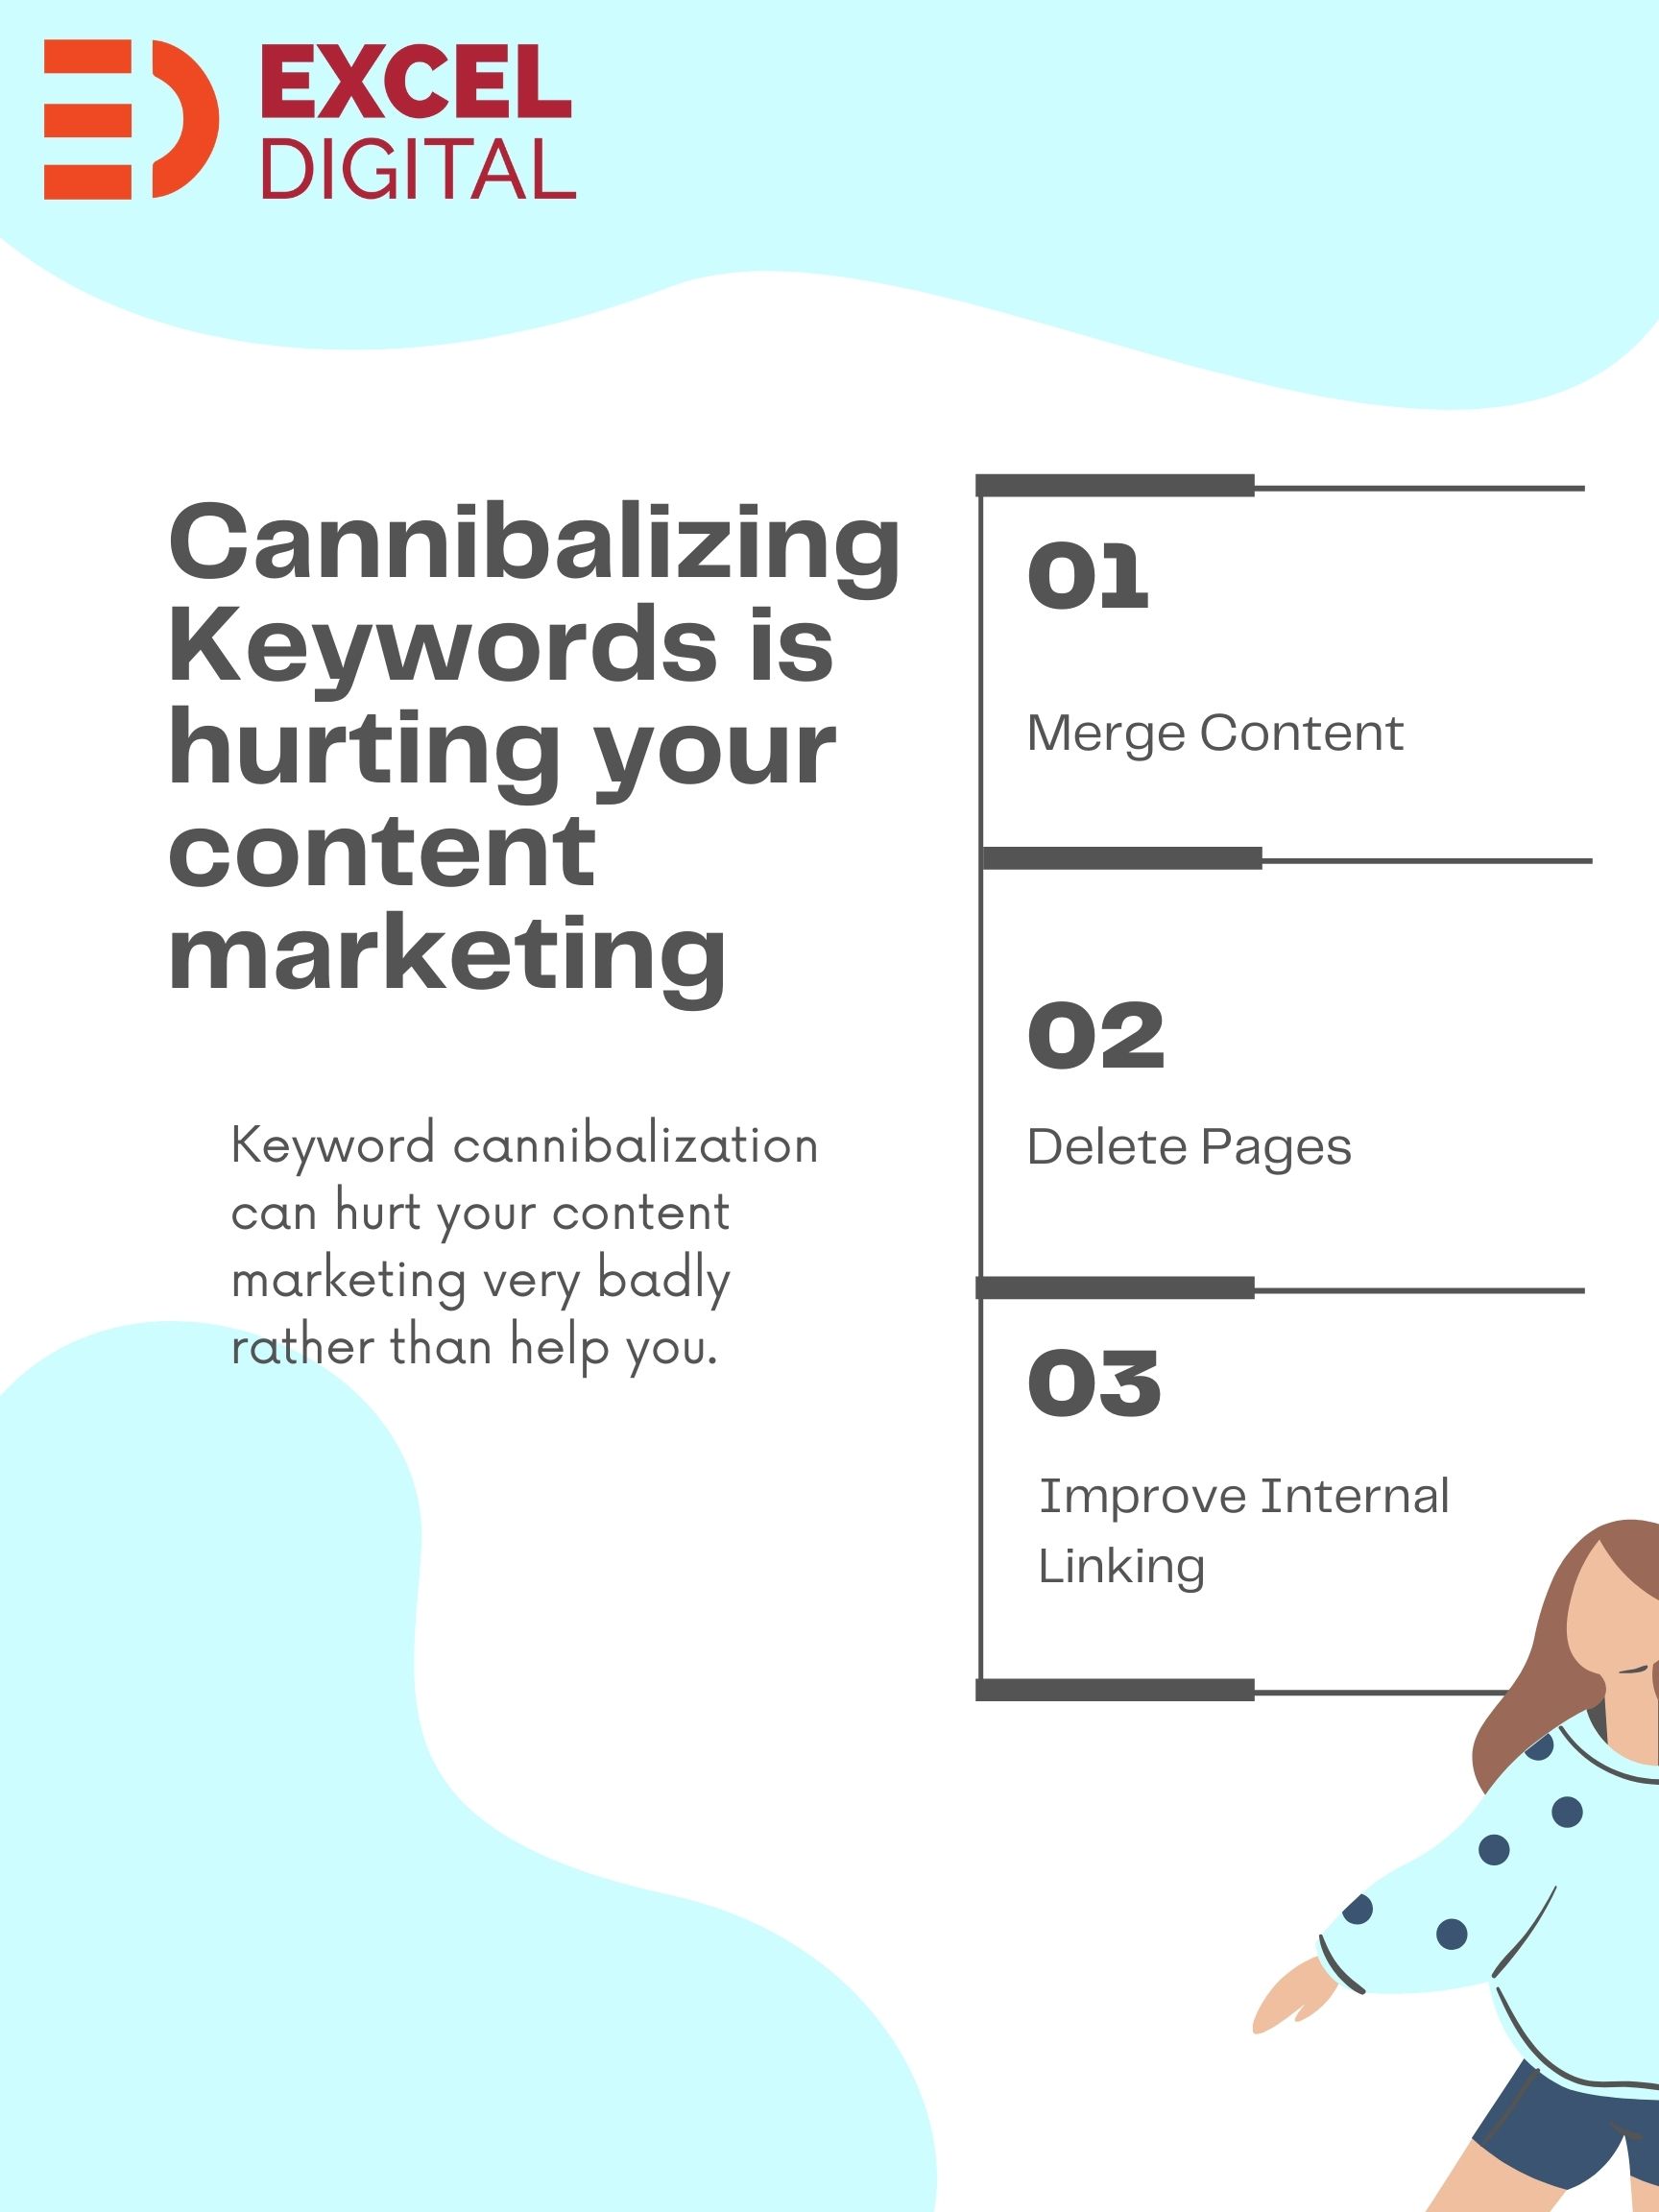 Cannibalizing Keywords is hurting your content marketing post thumbnail image